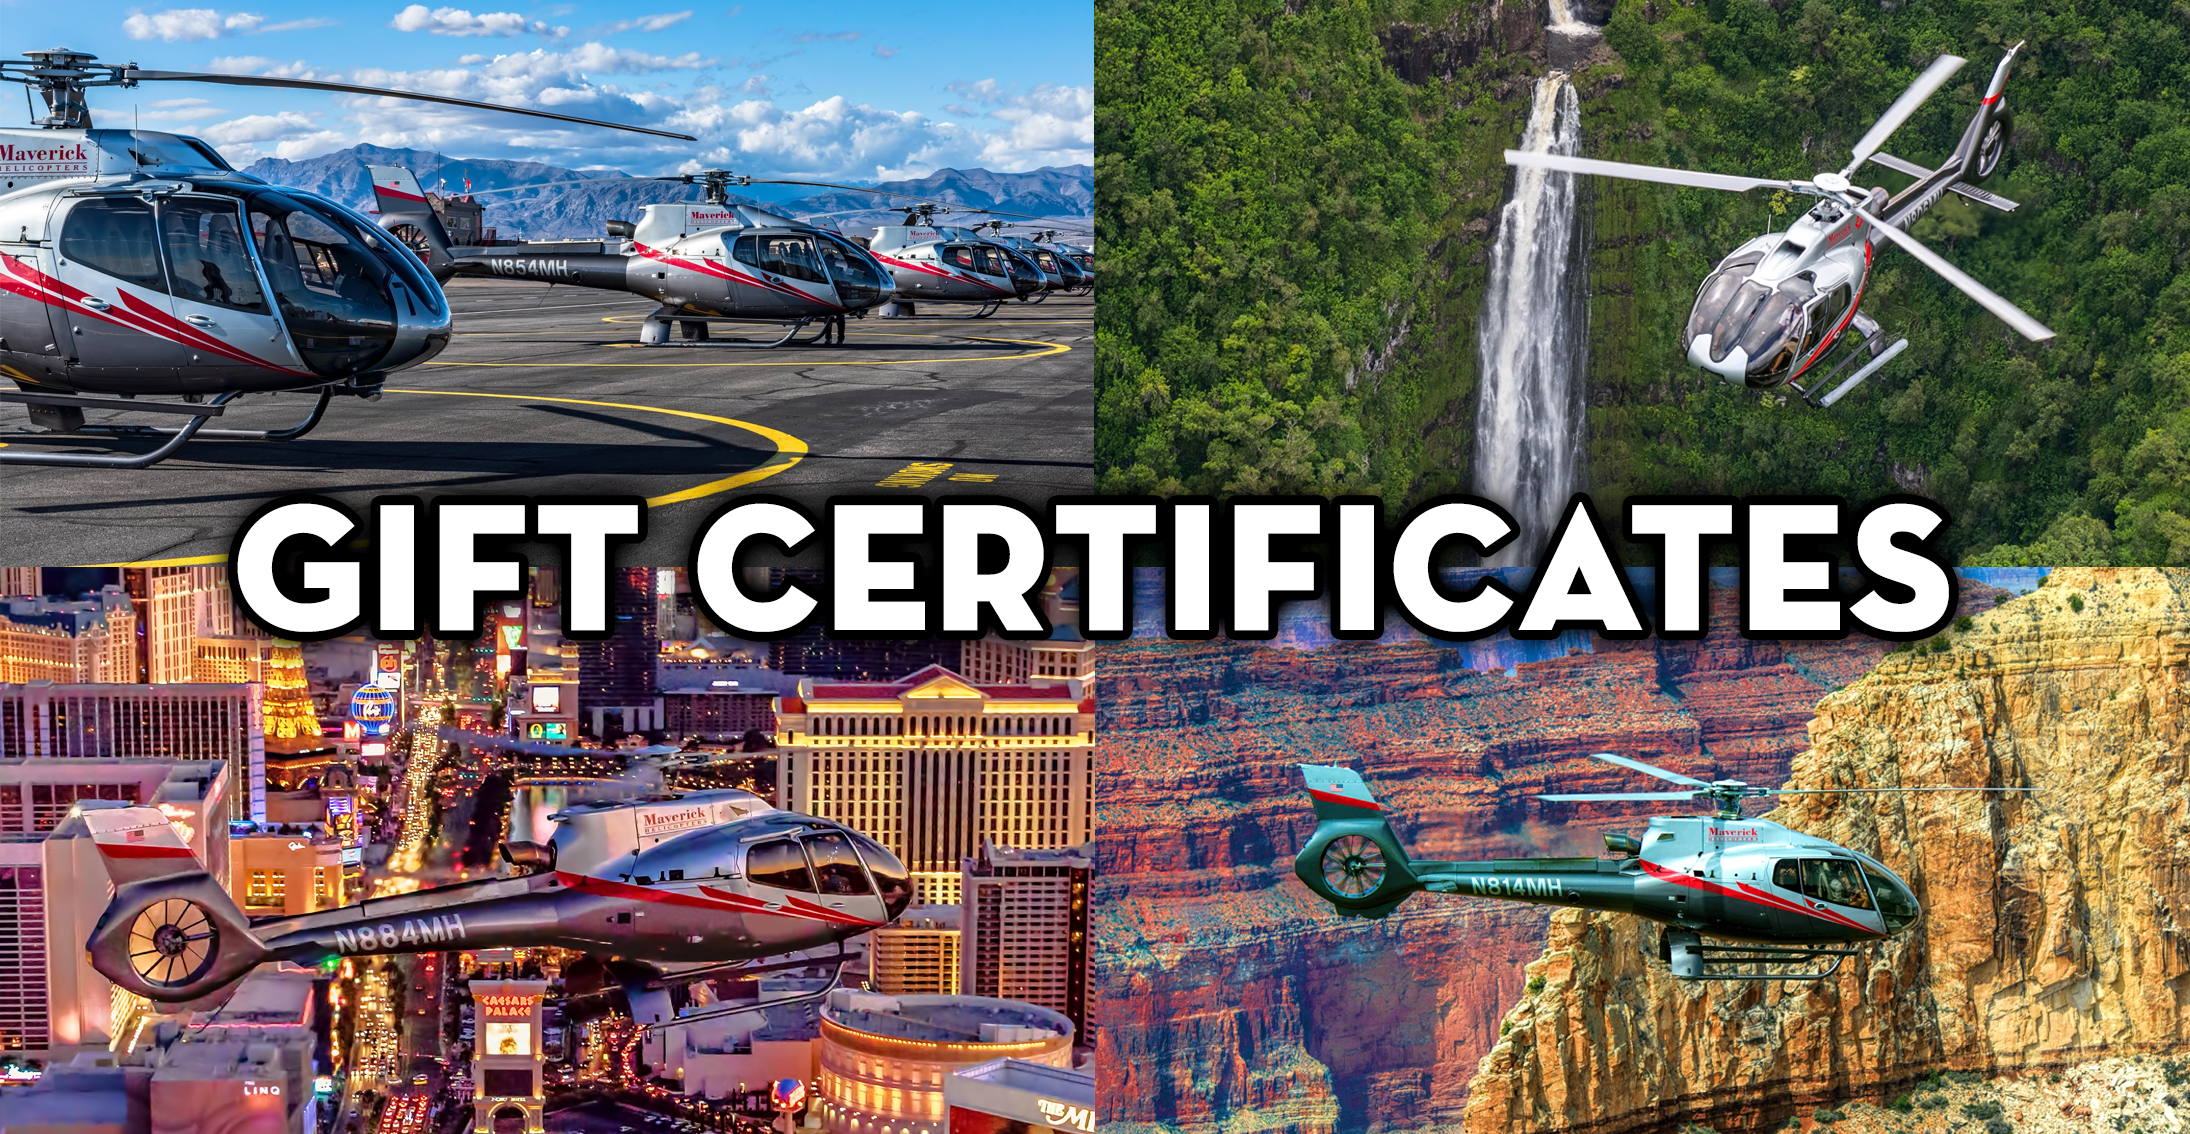 Gift cards for a Grand Canyon, Maui or Las Vegas helicopter tour